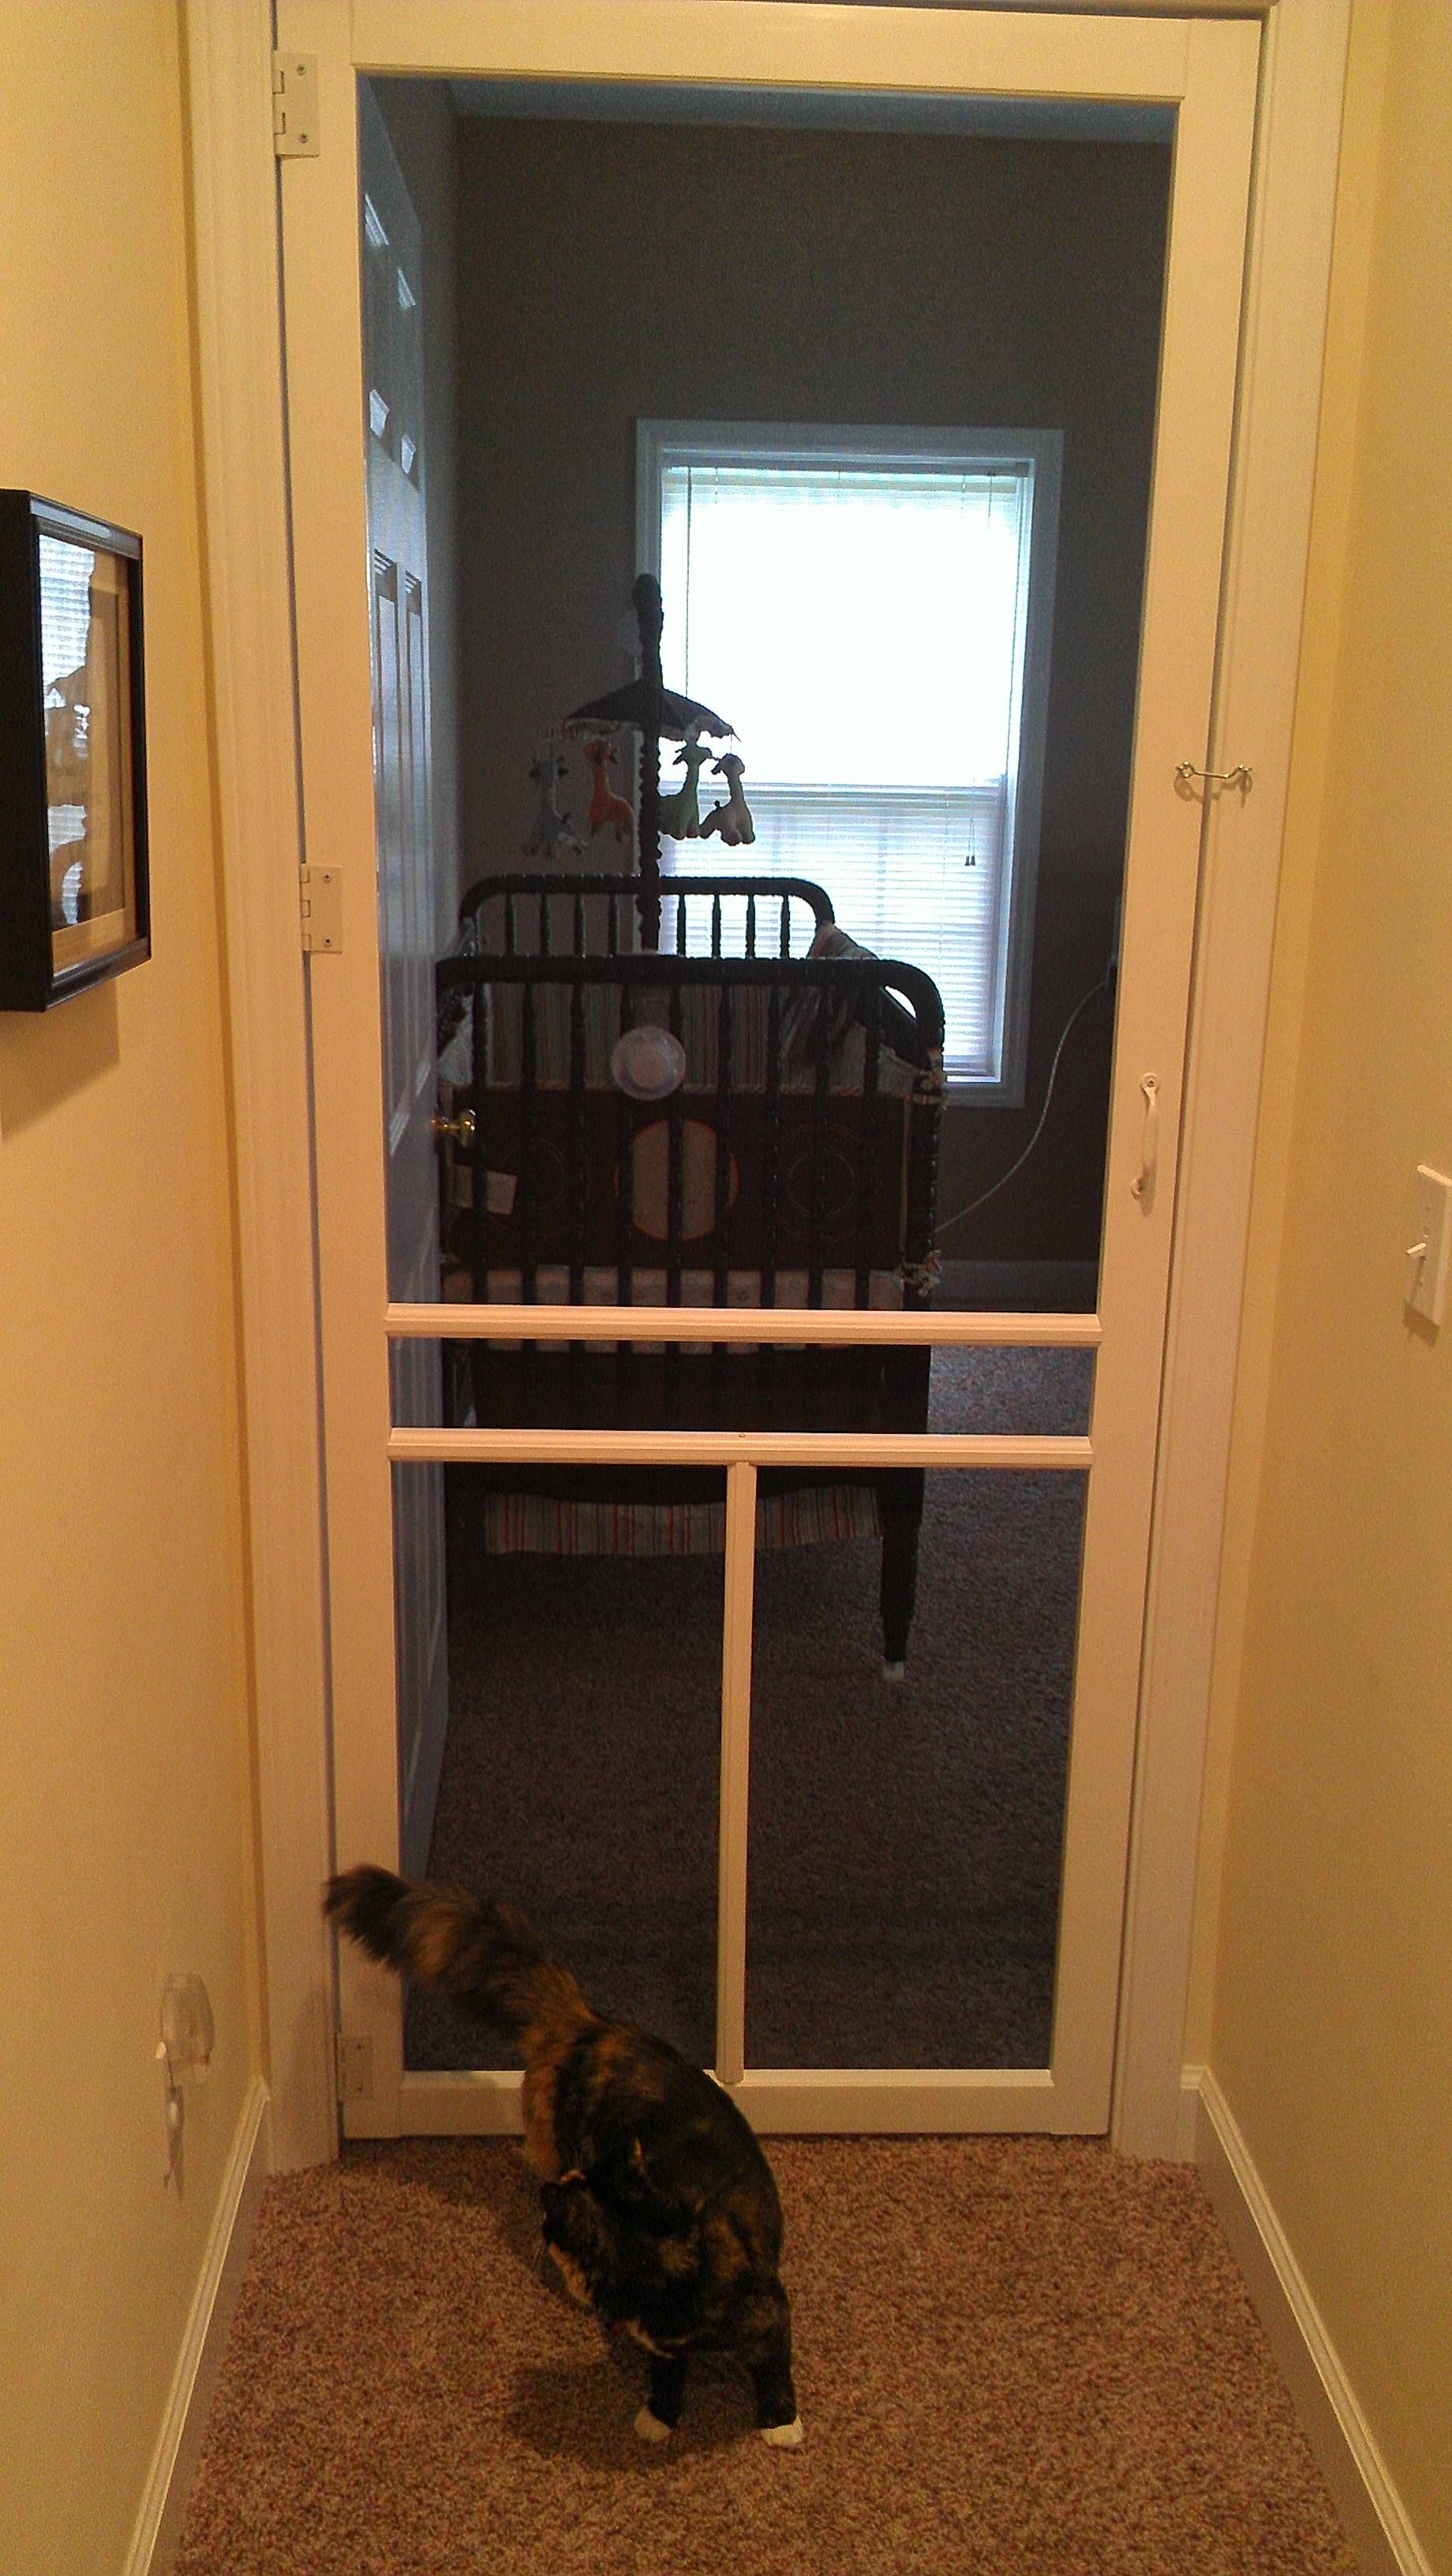 Screen Door On Babies Room So Cat Cannot Enter But We Can Still Hear pertaining to measurements 1840 X 3264